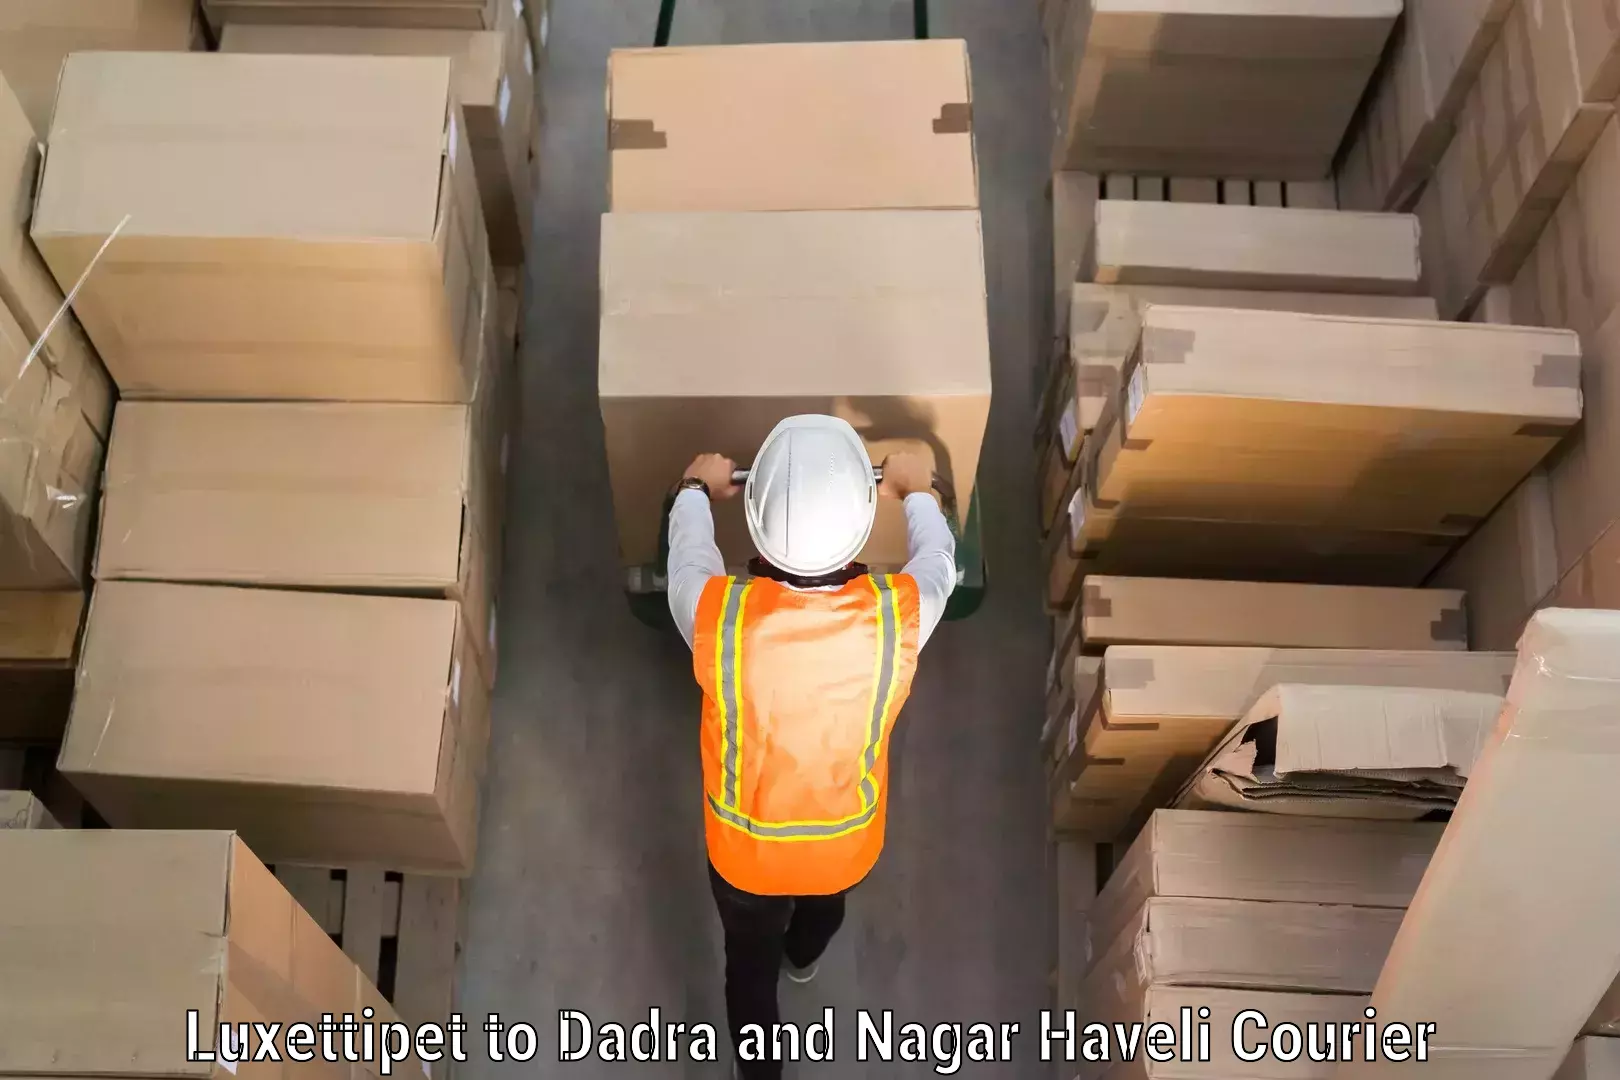 Efficient luggage delivery Luxettipet to Dadra and Nagar Haveli